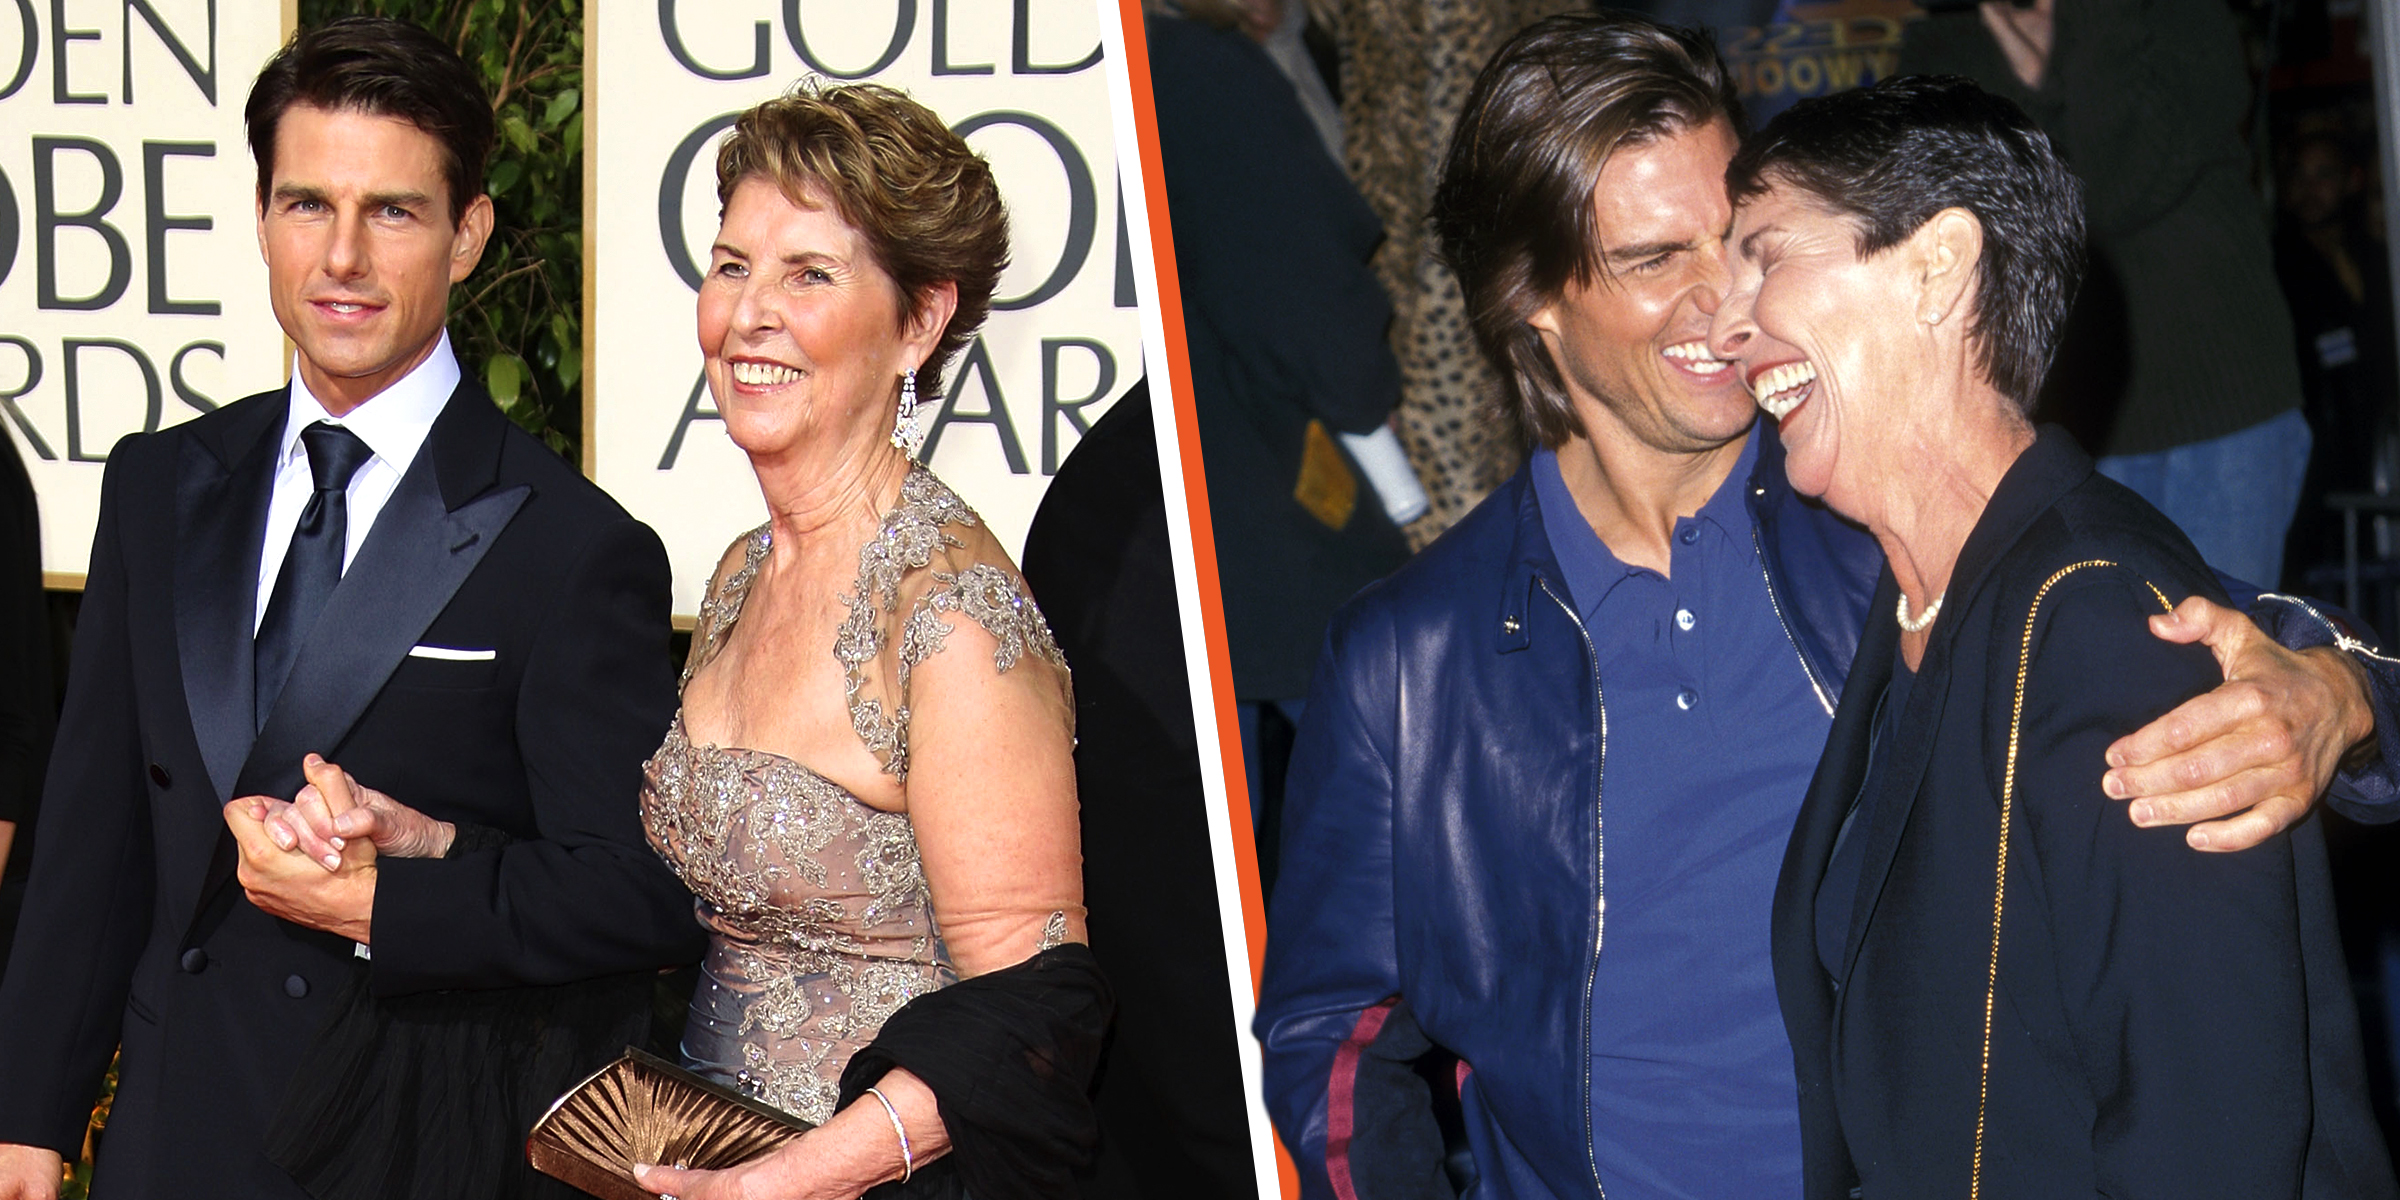 Tom Cruise and Mary Lee Pfeiffer | Source: Getty Images